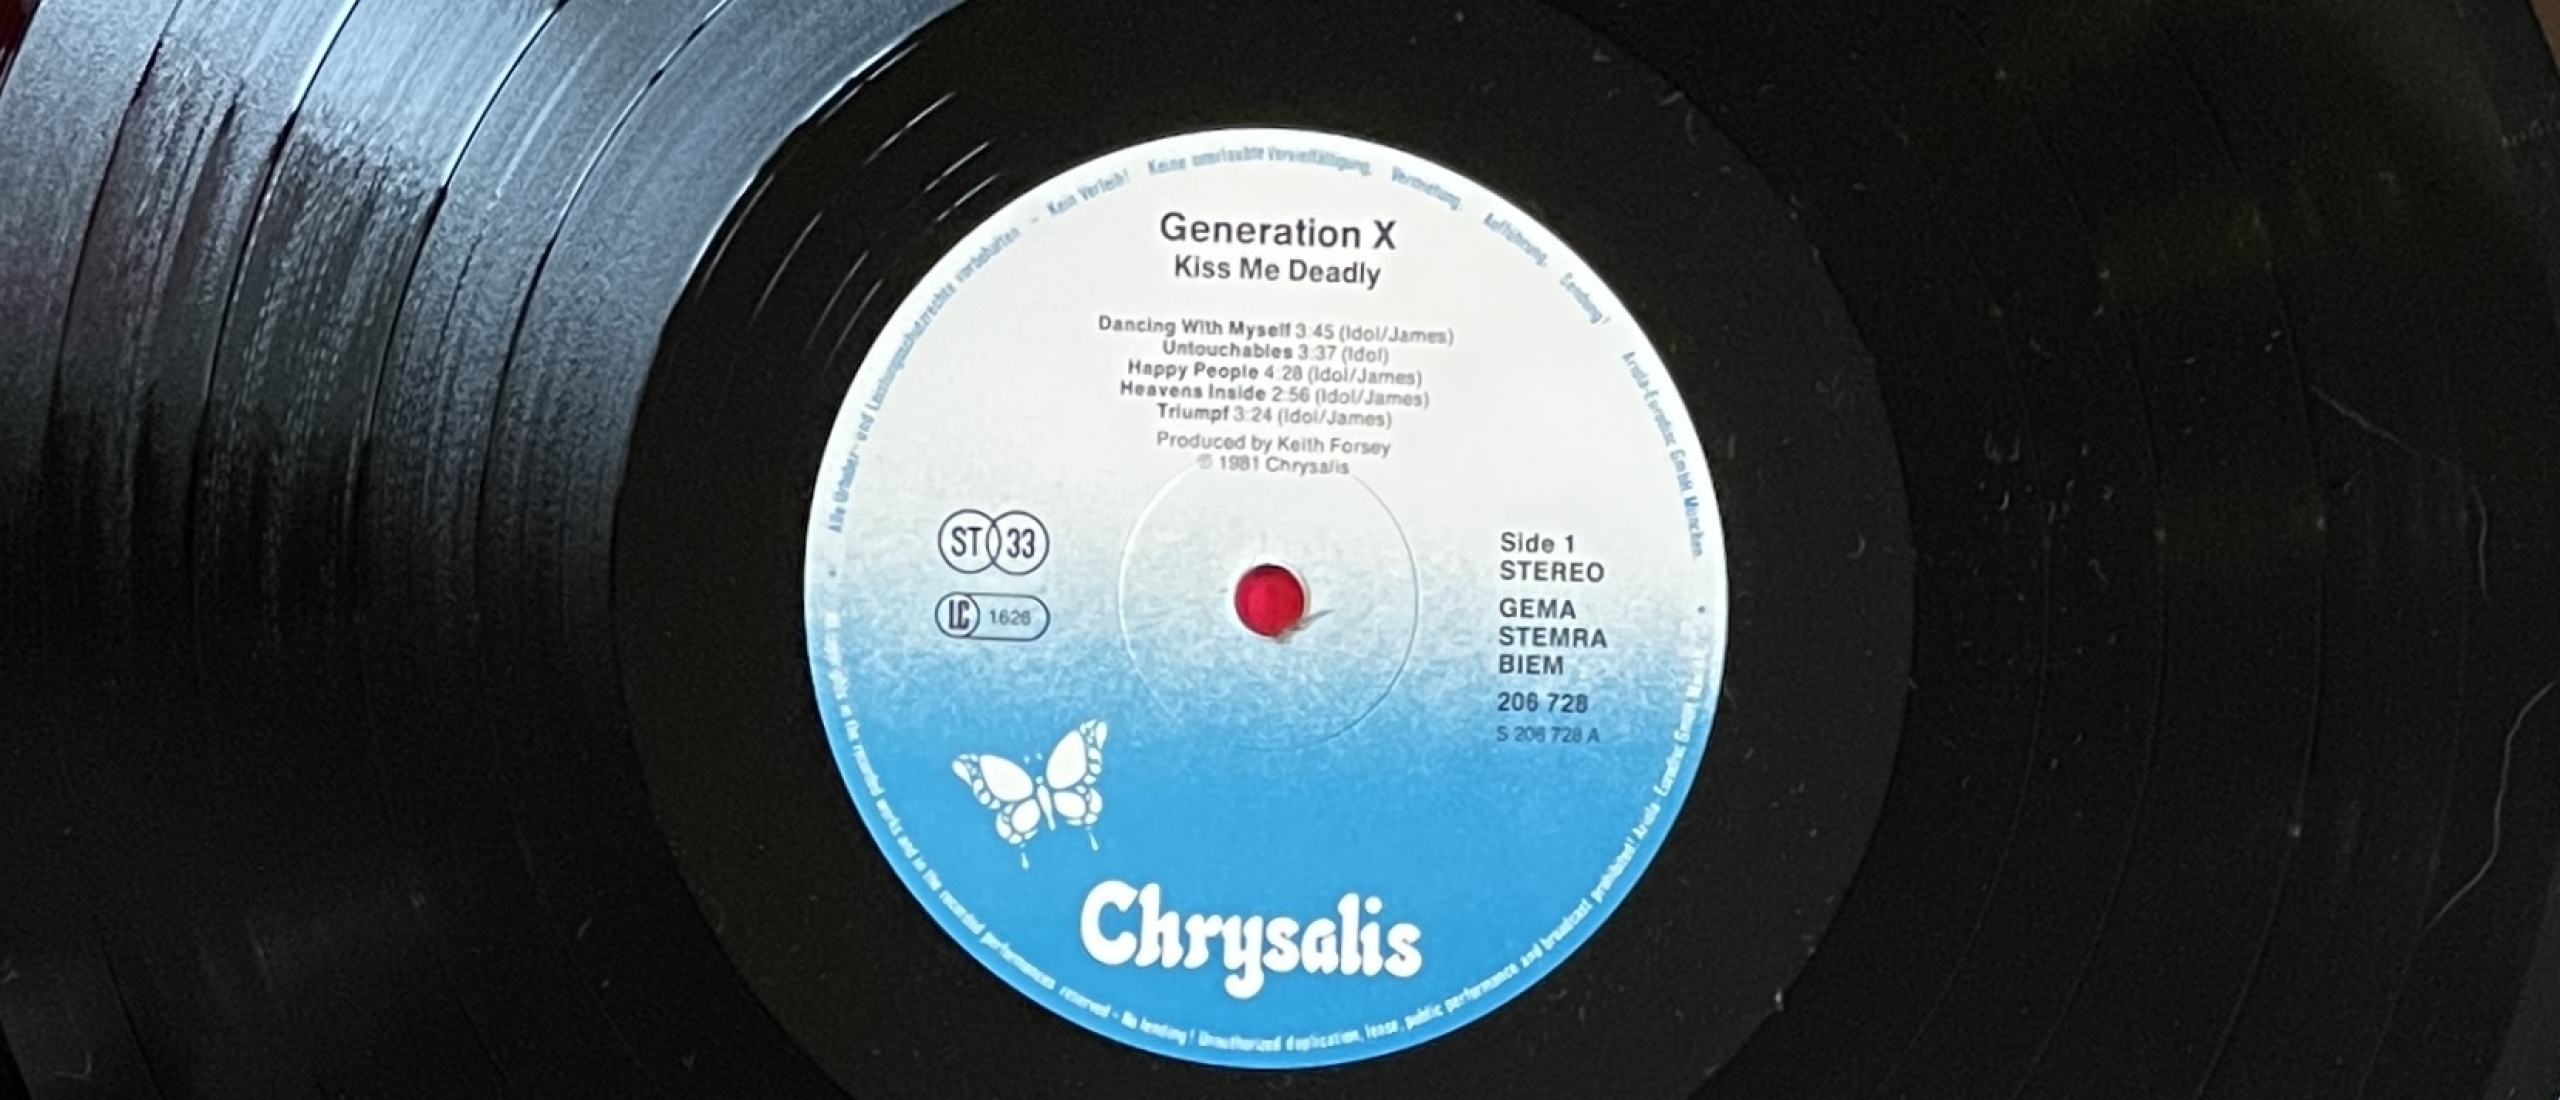 Forgotten Song Friday Generation X Dancing With Myself